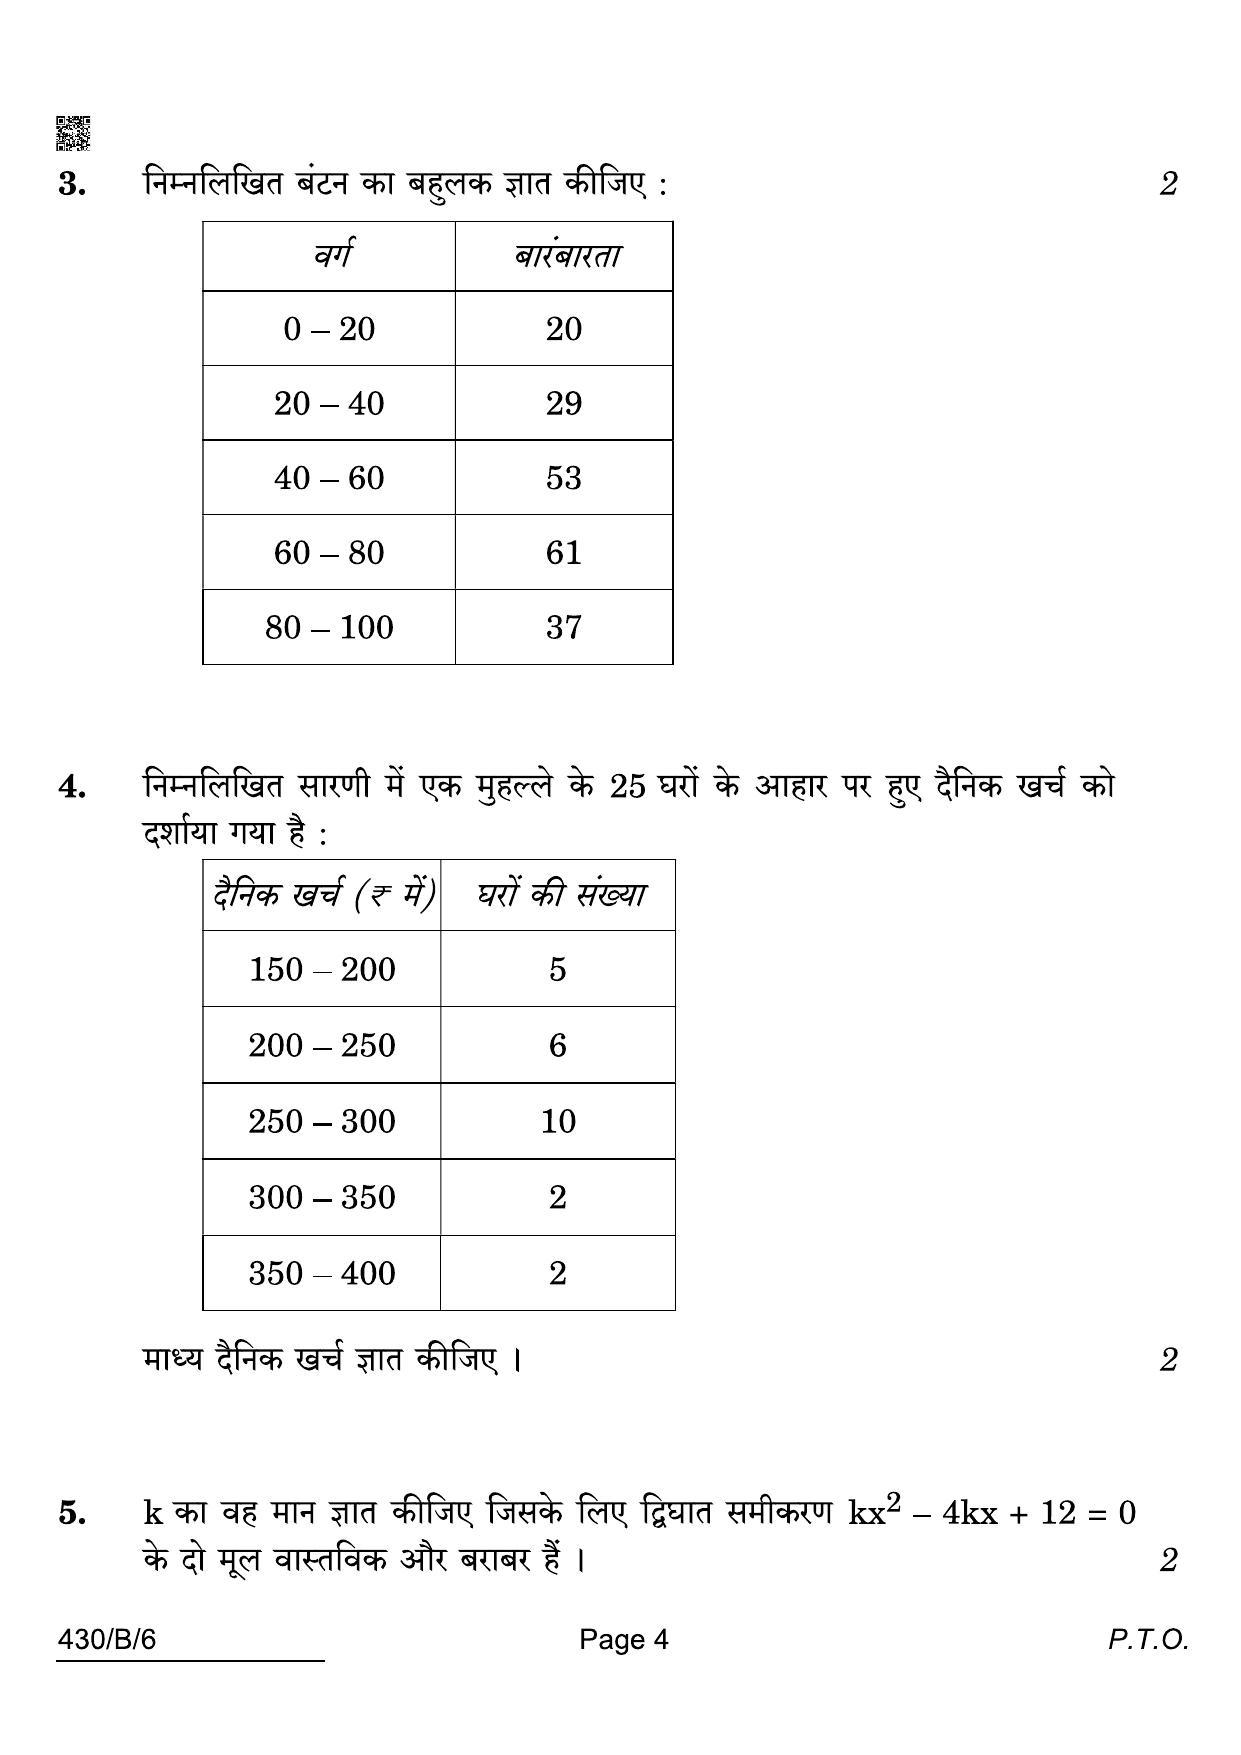 CBSE Class 10 430-B-6 Maths Basic Blind 2022 Compartment Question Paper - Page 4